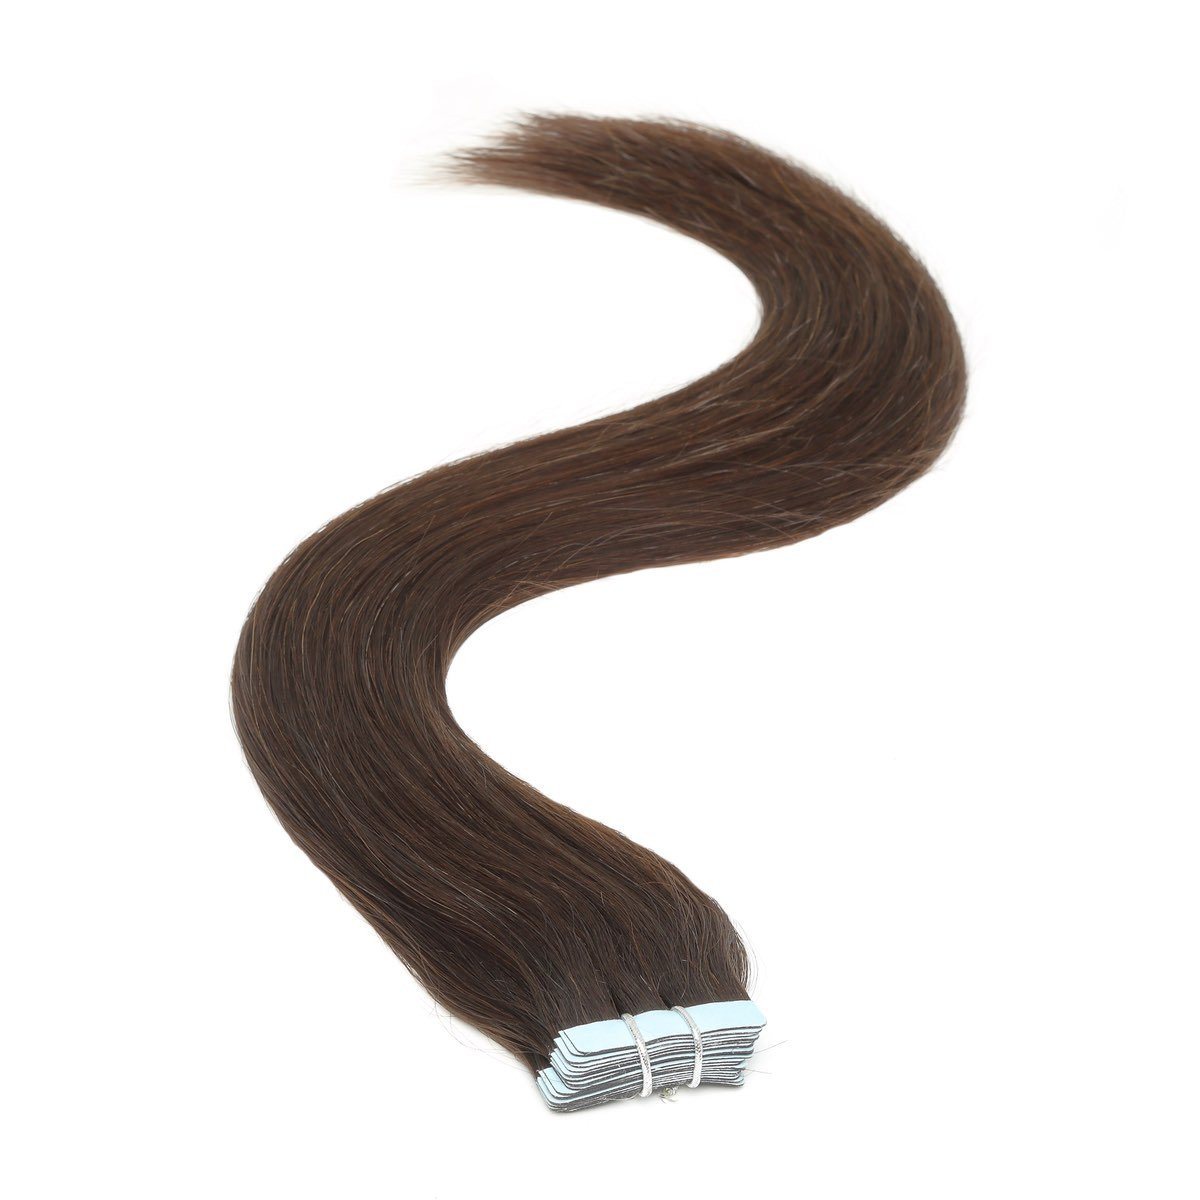 Tape in Hair Extensions 18 inch (1B) - Beauty Hair Products LtdHair Extensions